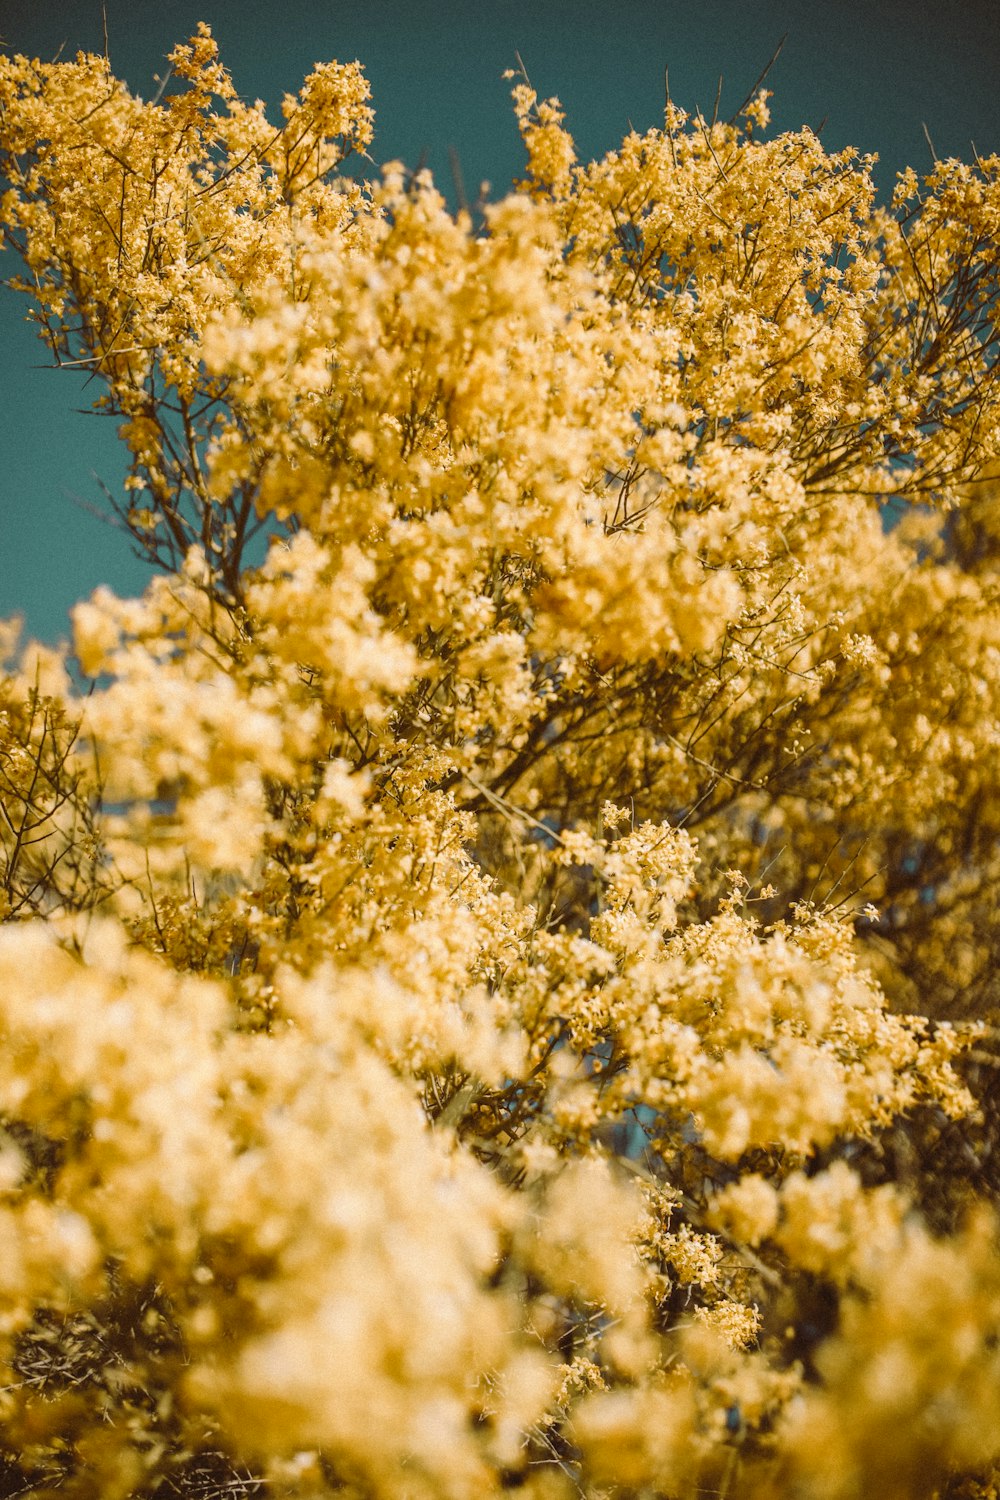 yellow leafed tree